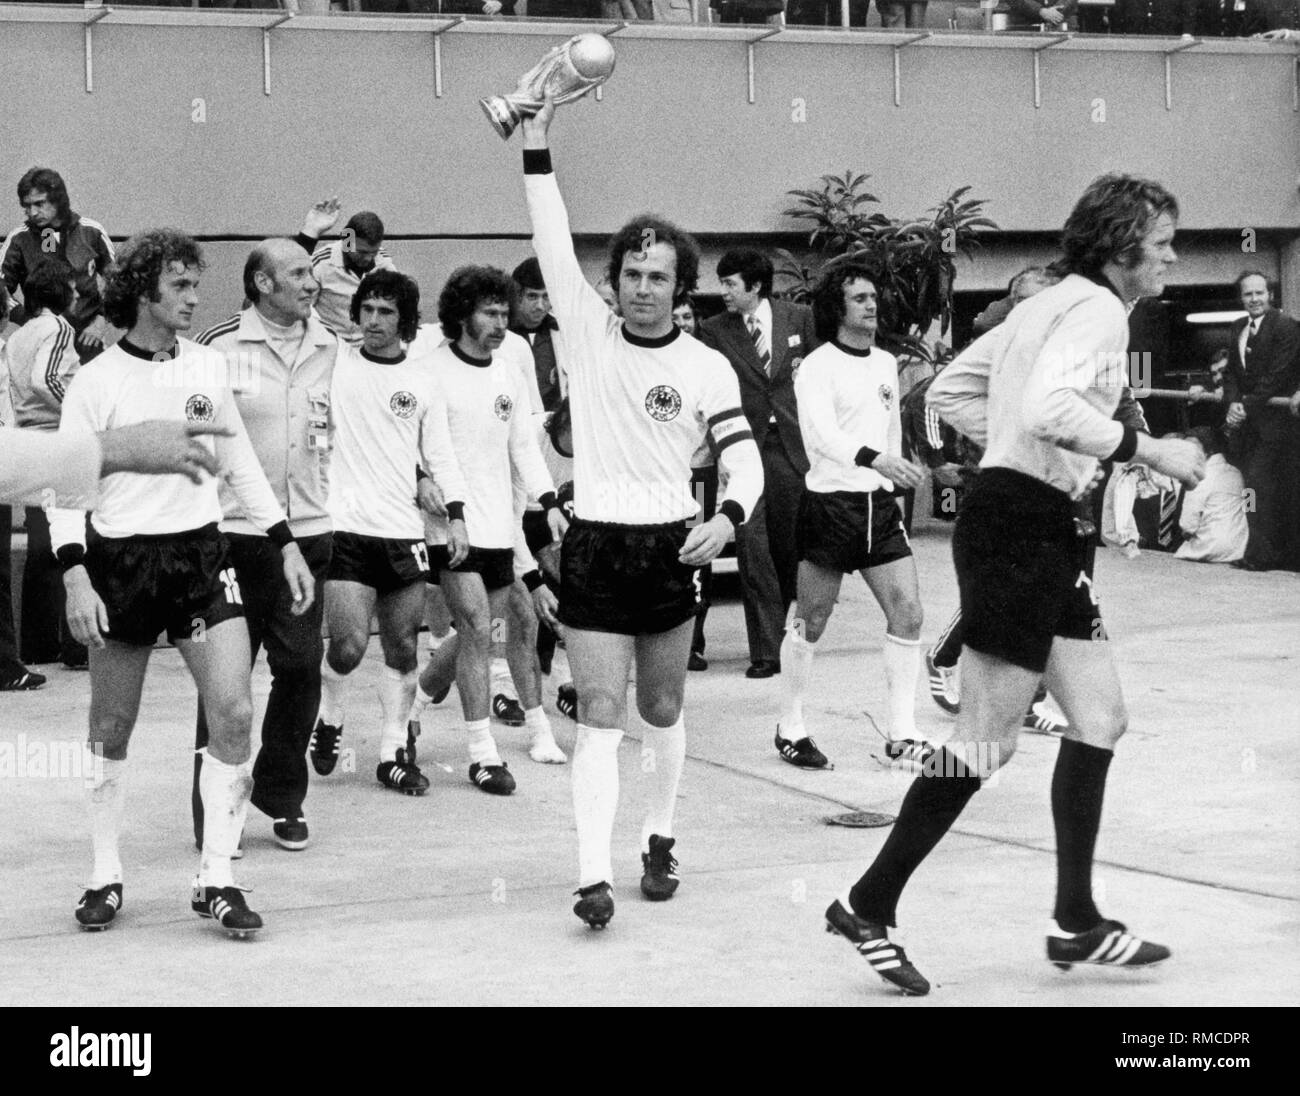 After the final of the FIFA World Cup in Munich (2-1 victory over the Netherlands) captain Franz Beckenbauer receives the trophy. Stock Photo